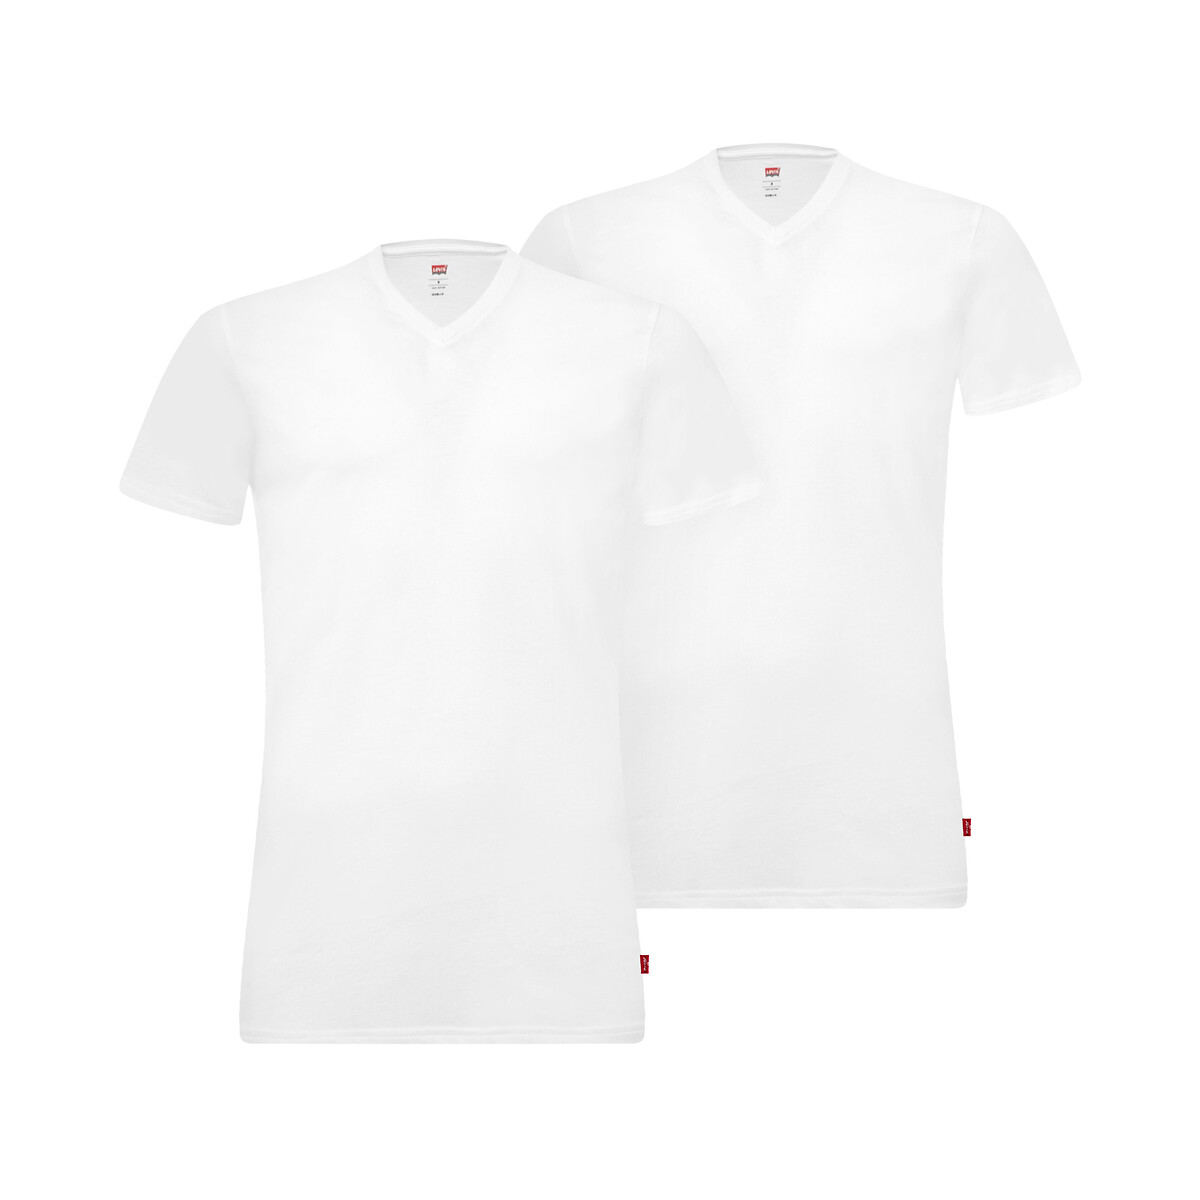 Image of Pack of 2 Cotton T-Shirts with V-Neck